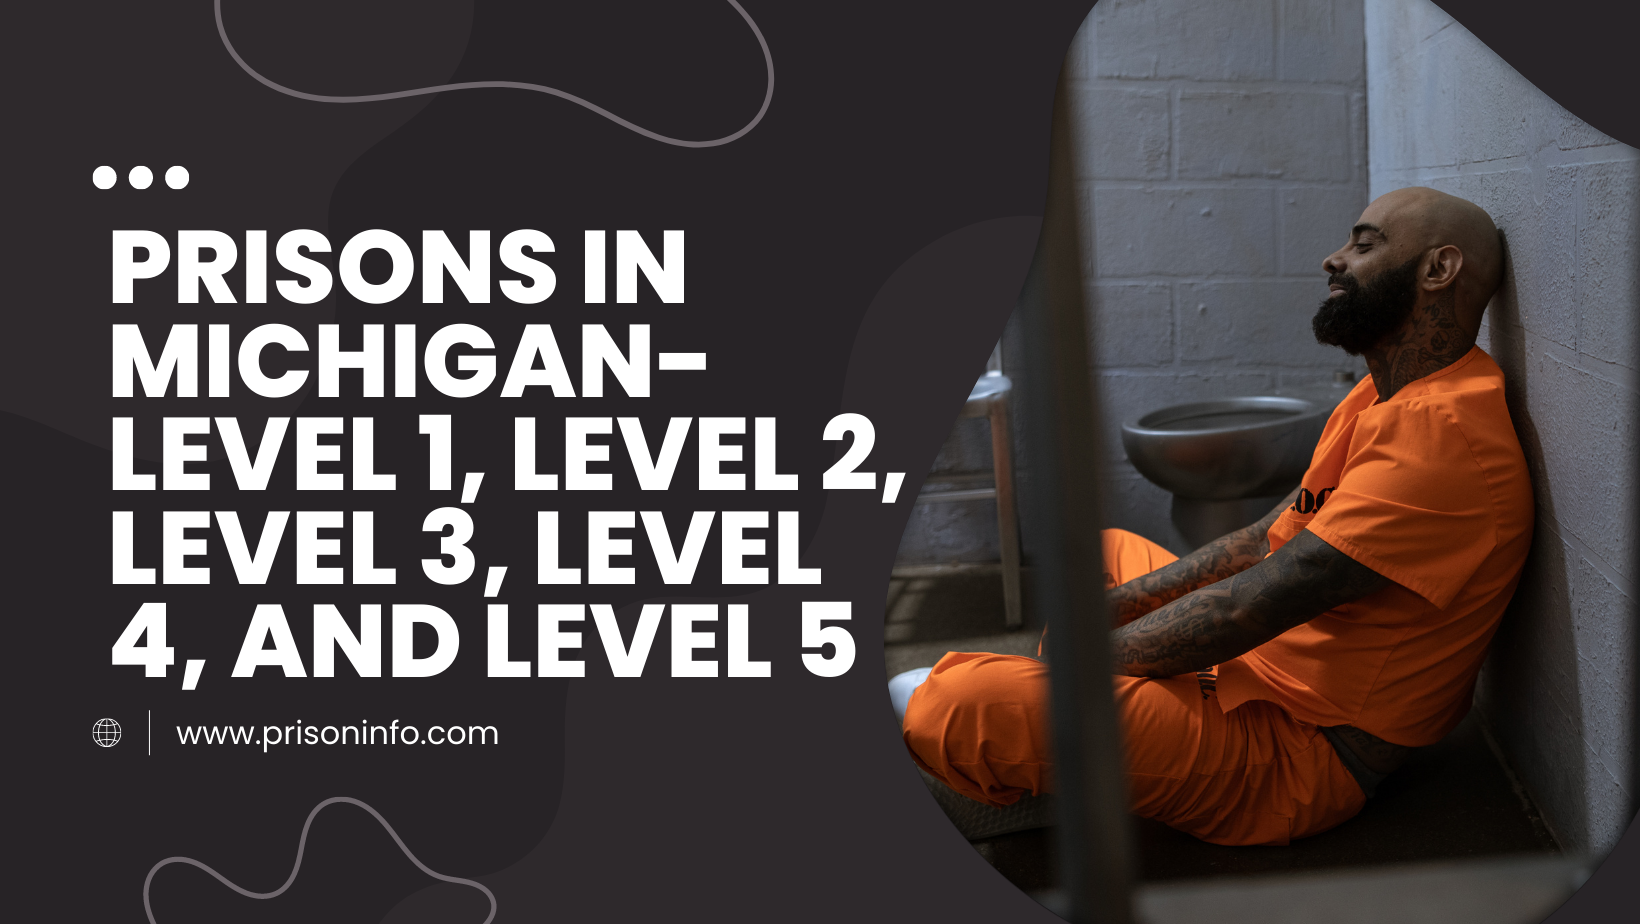 Prisons In Michigan- Level 1, Level 2, Level 3, Level 4, and Level 5